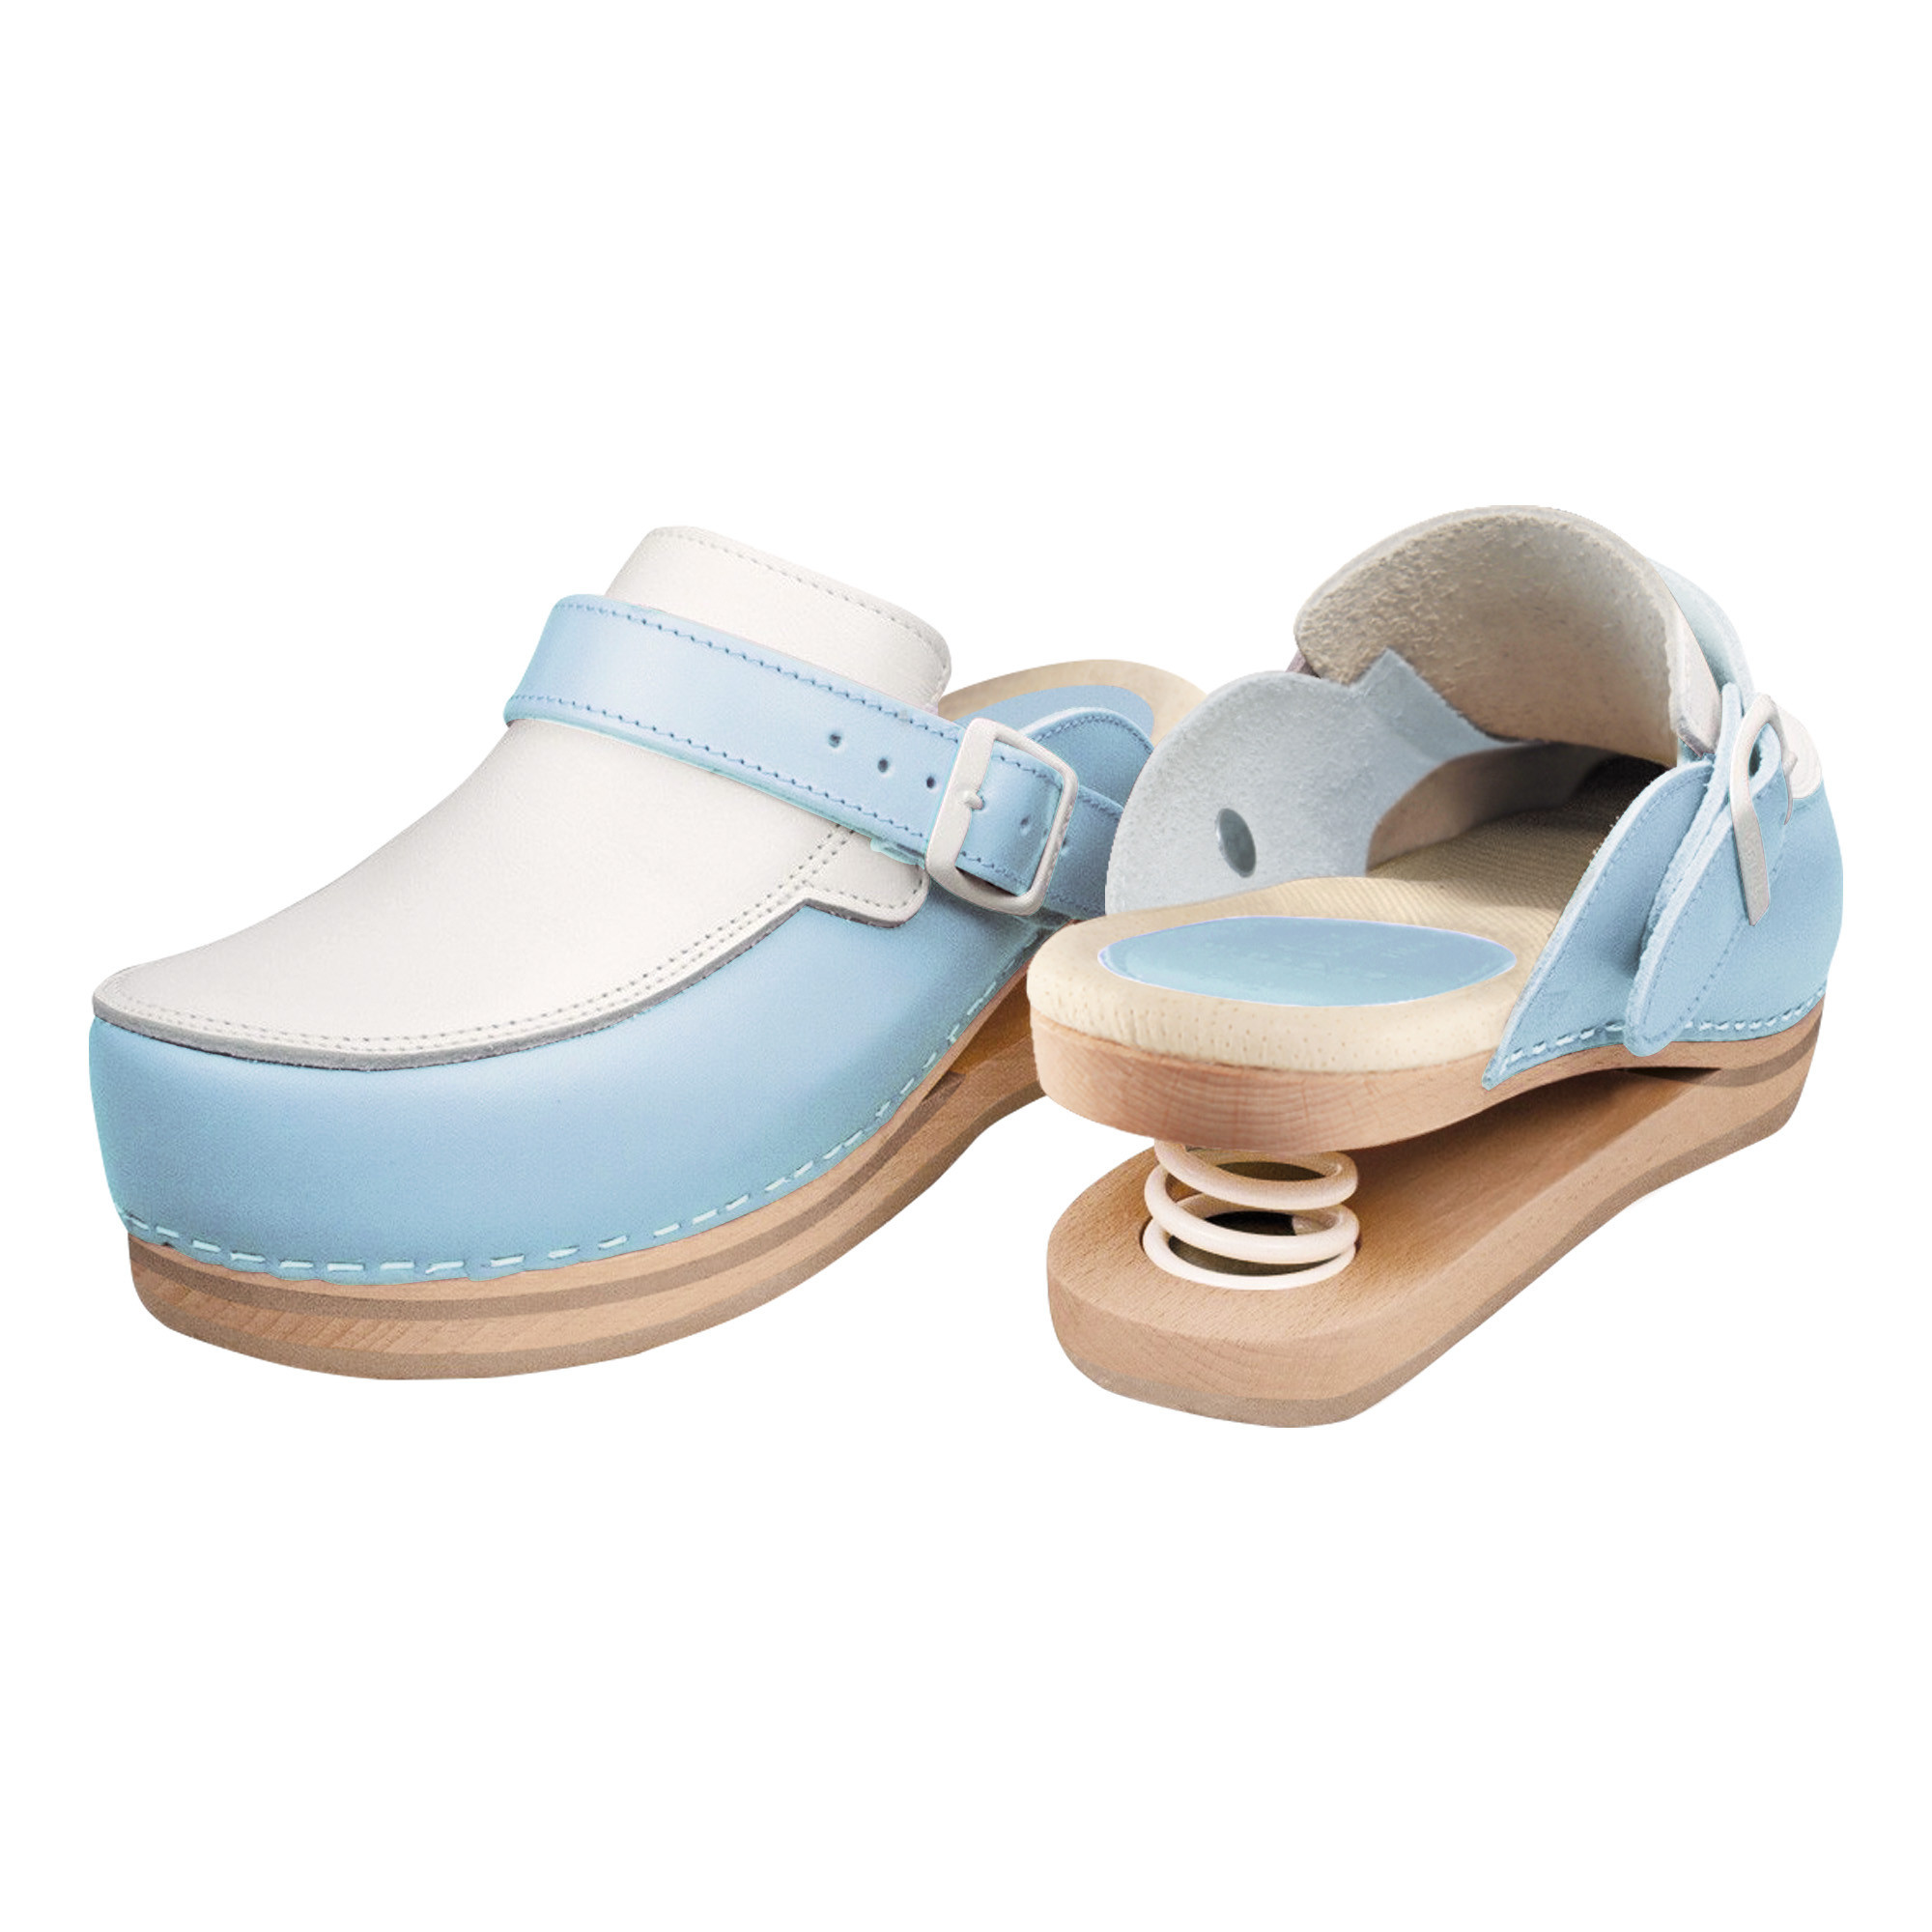 Relax clogs closed with blue spring Size 37